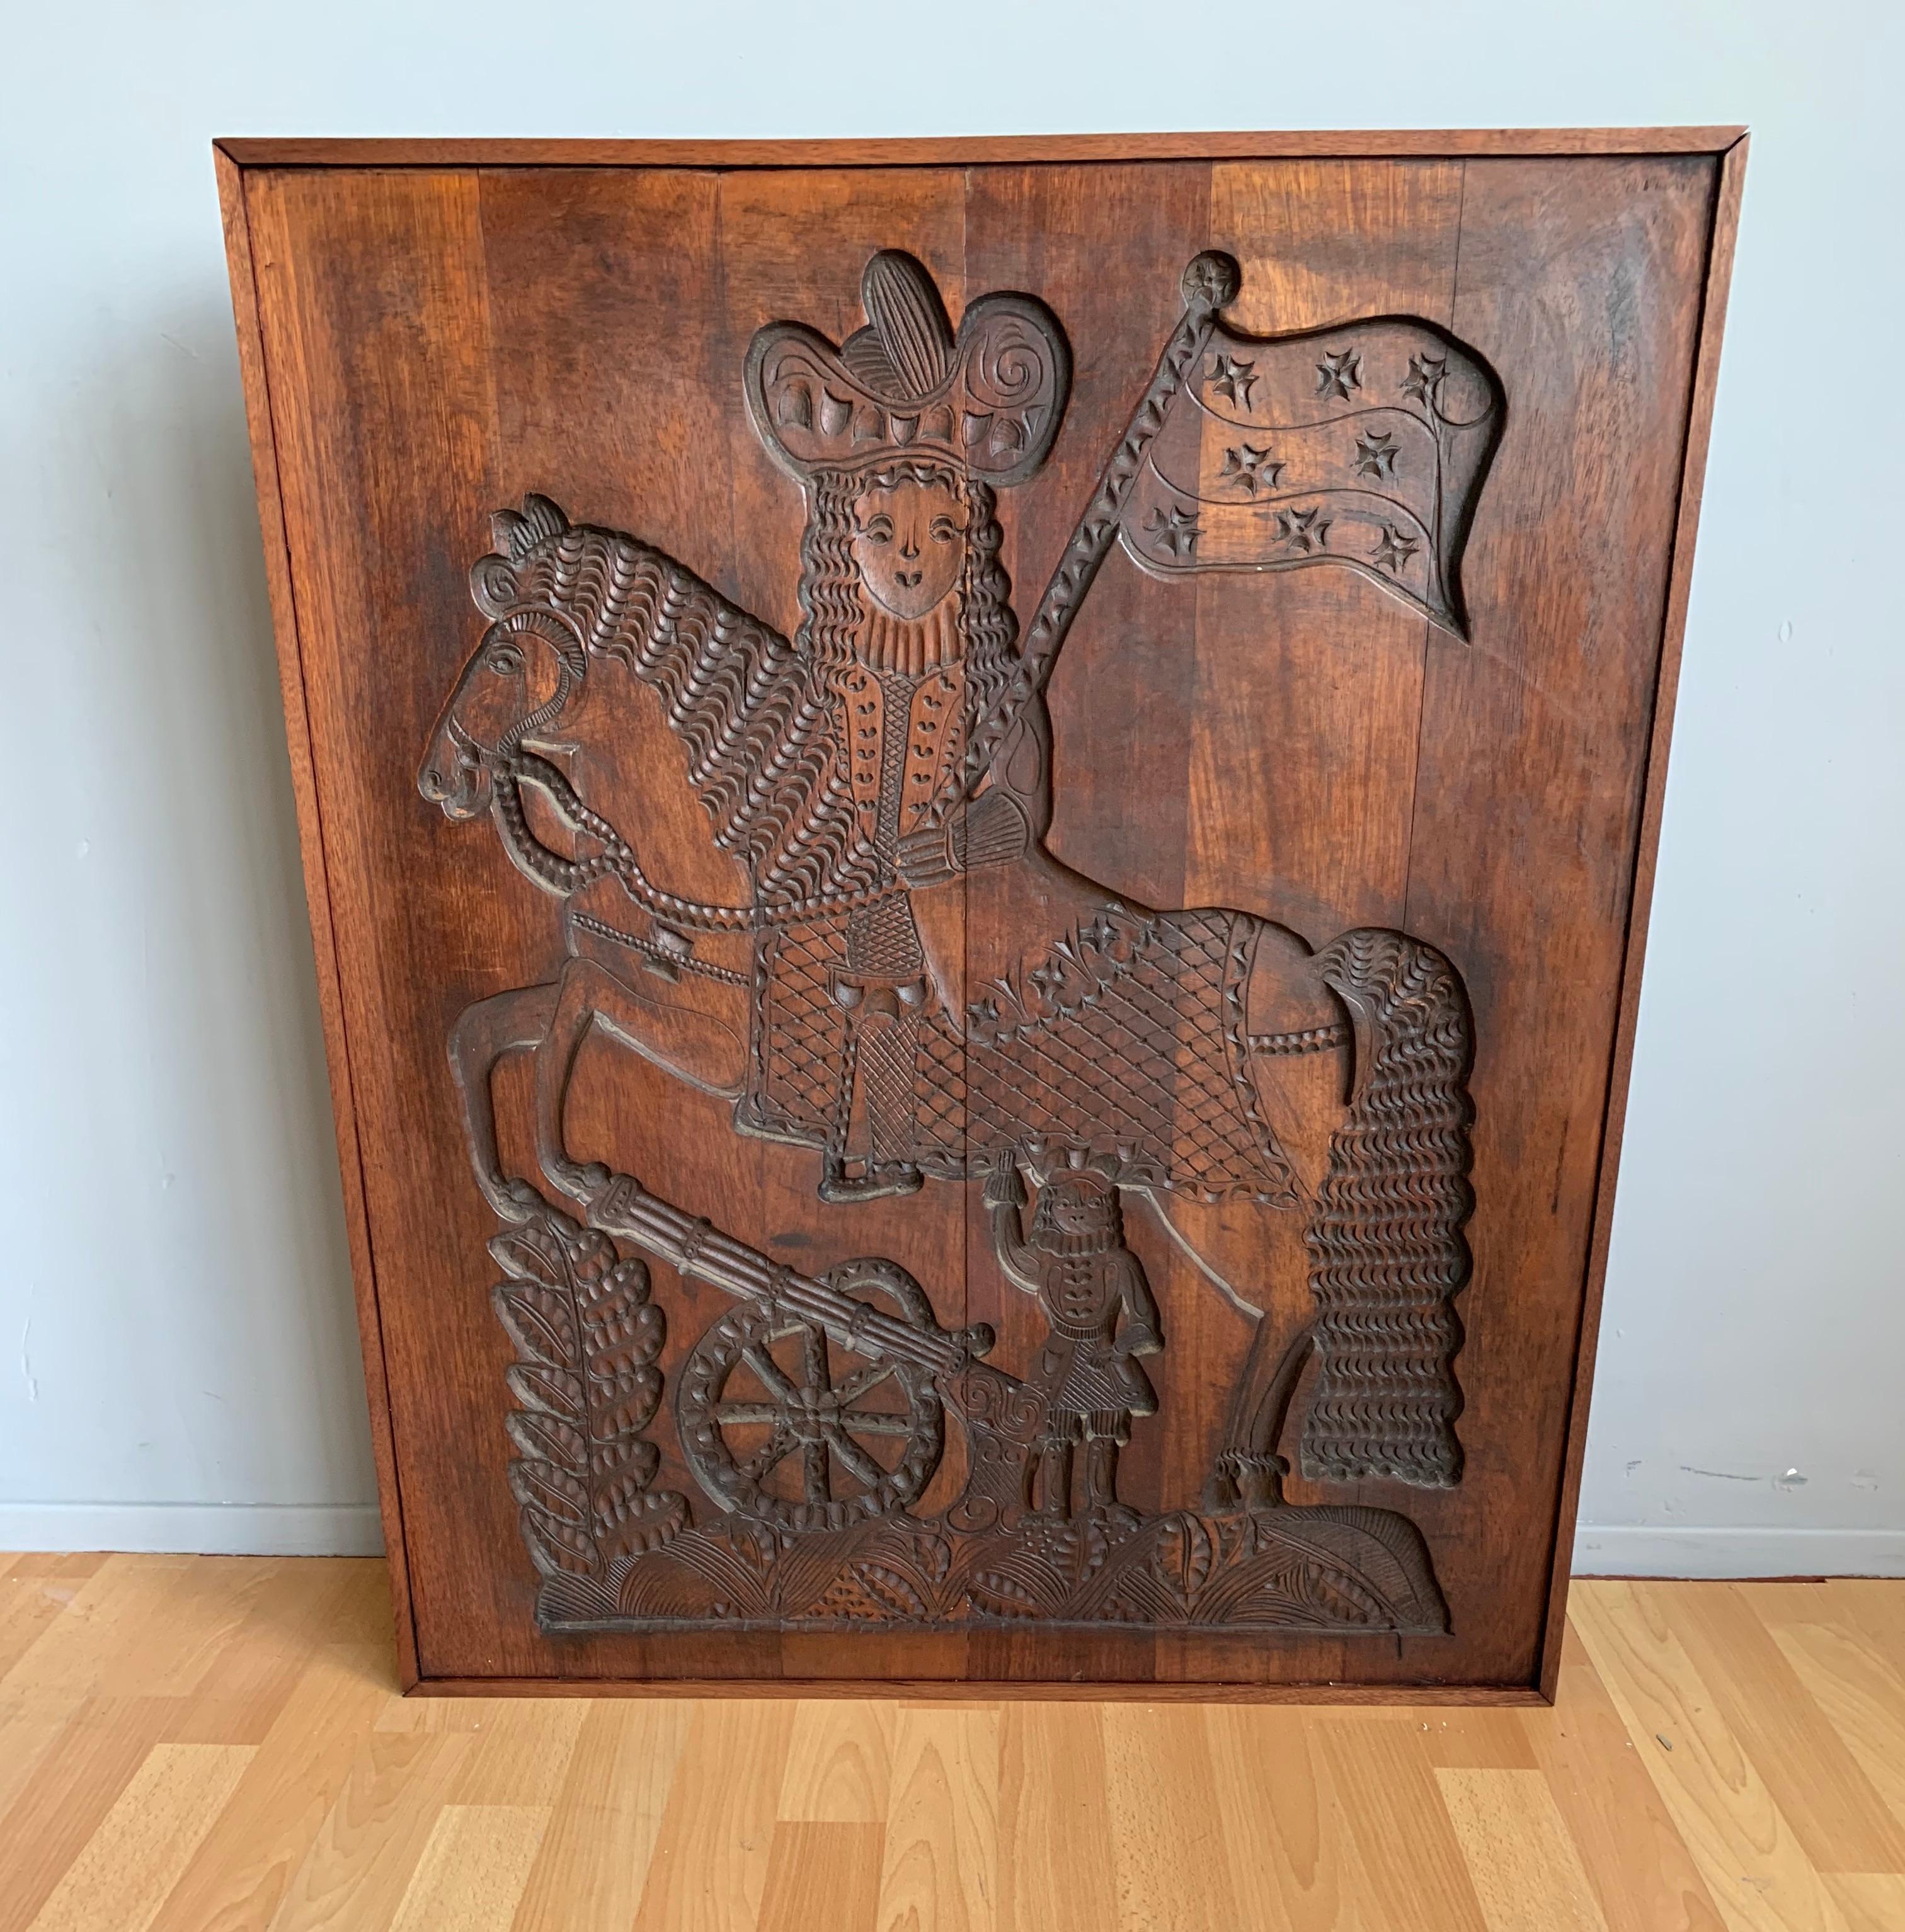 Largest ever and highly decorative, hand carved wooden gingerbread mold.

With gingerbread molds dating back to the middle ages these works of (folk) art have an amazingly long history in Europe. Some were (and some still are) real works of art,